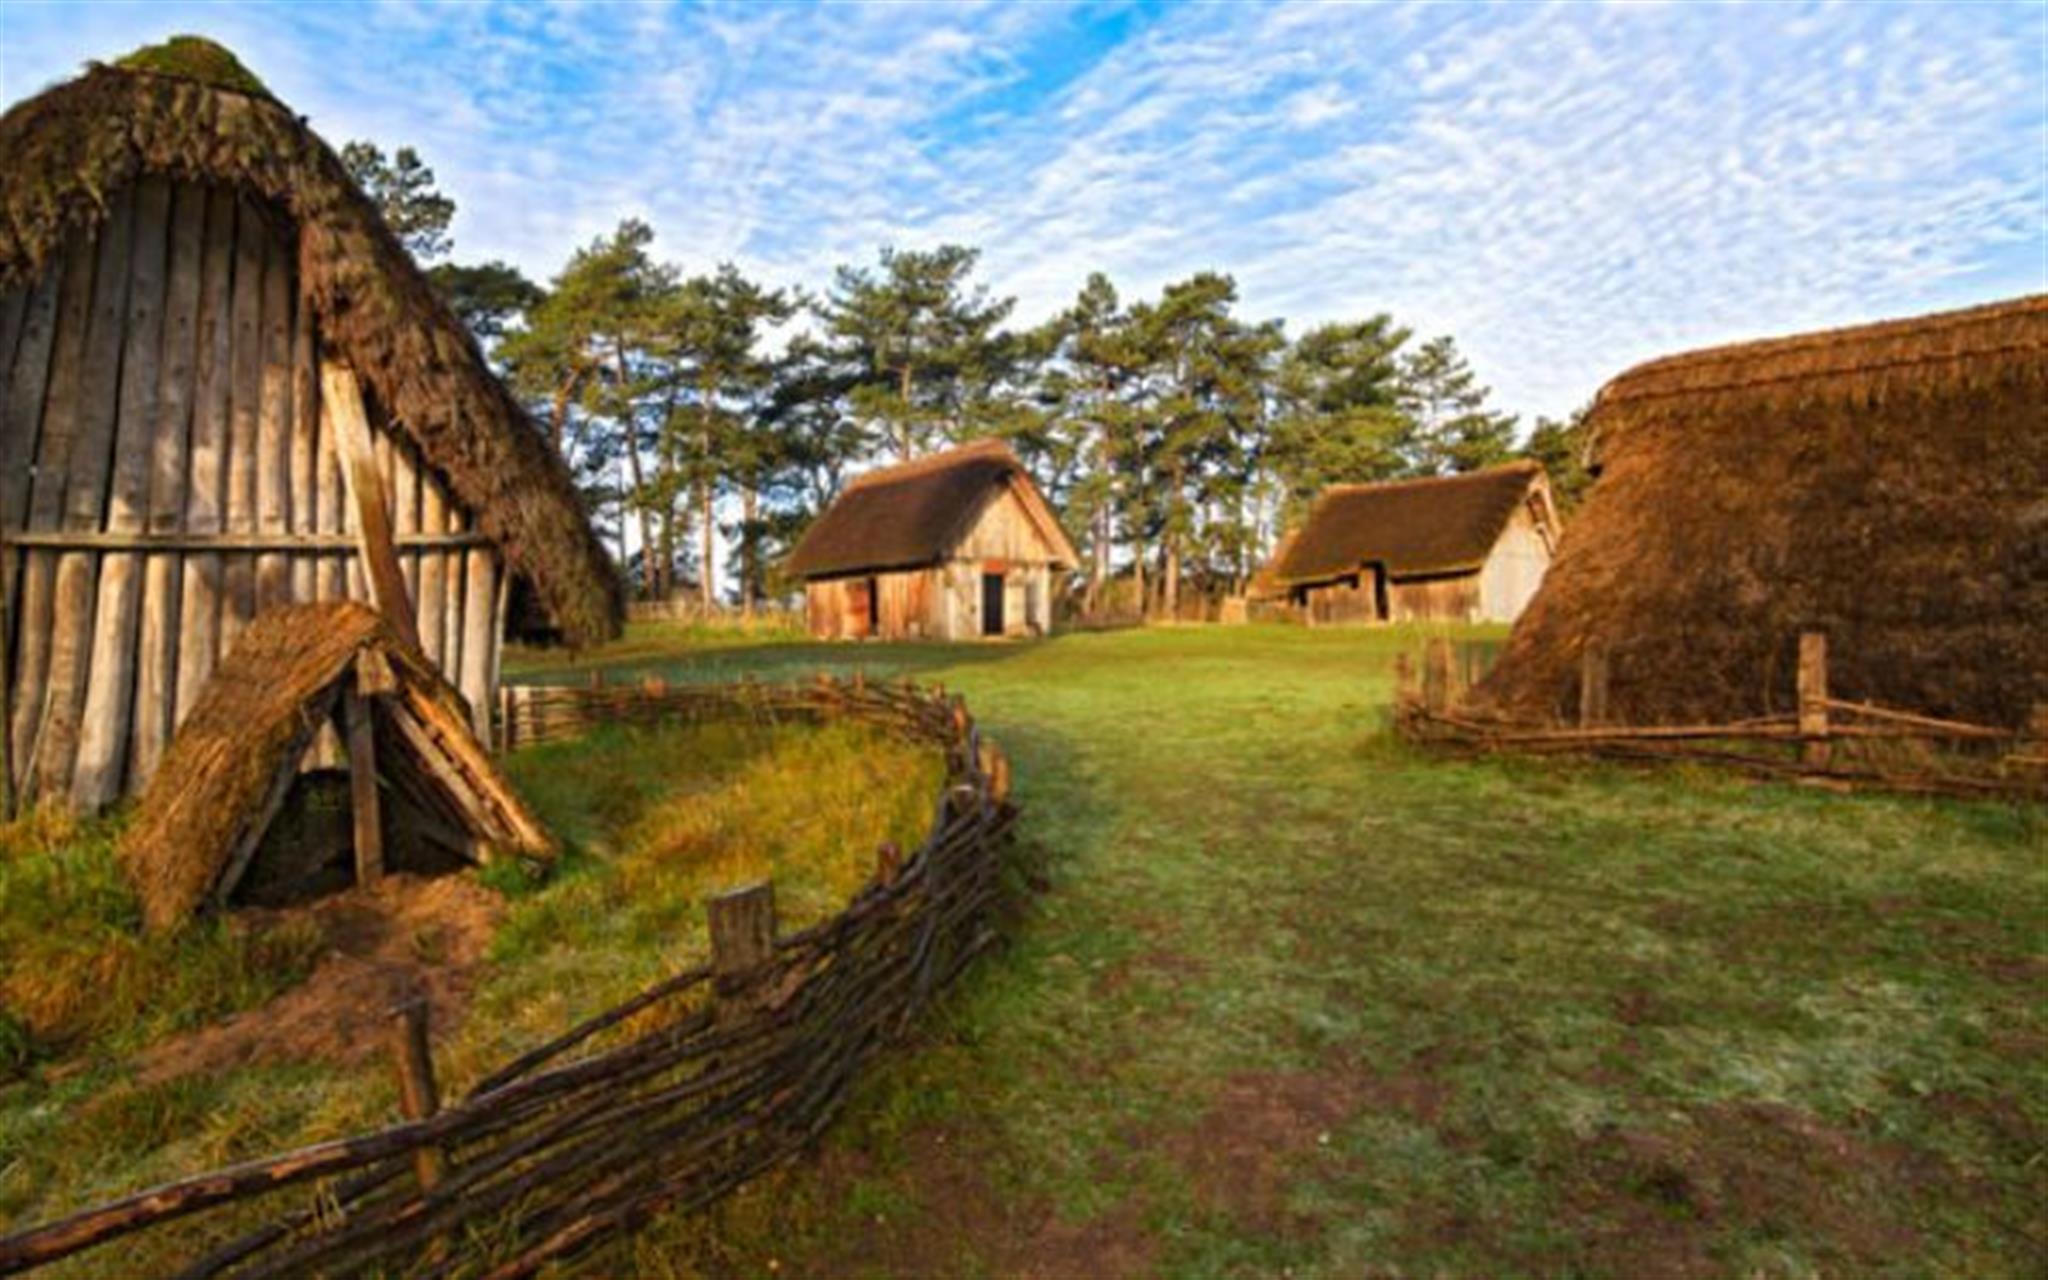 Photography workshop for Adults – The Saxon Village